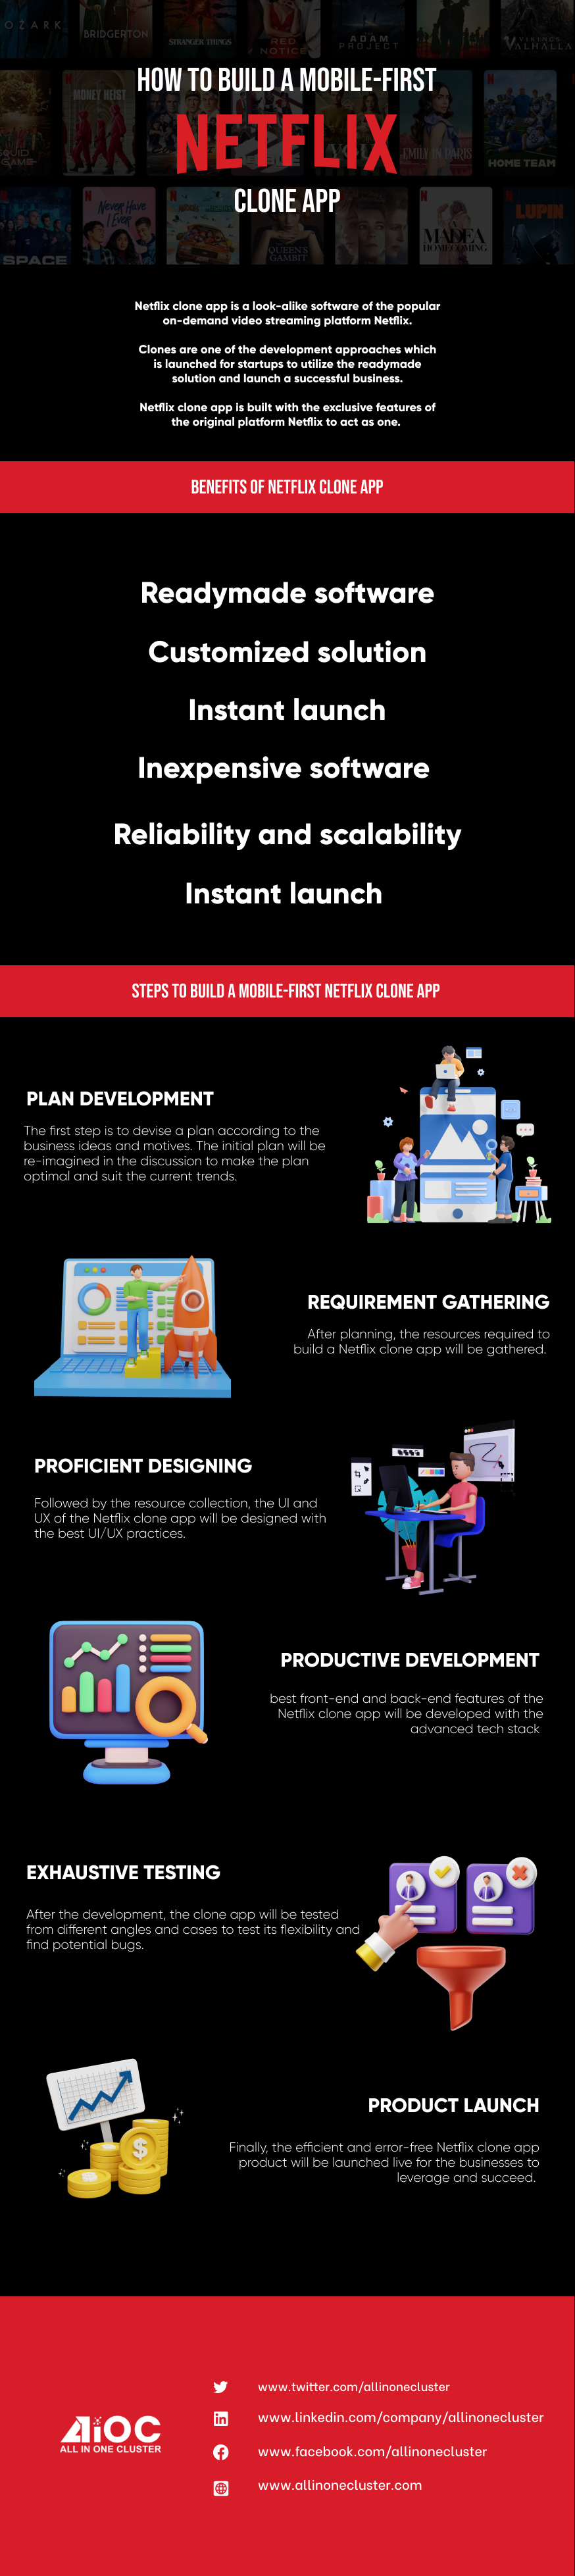 How to Build a Mobile-First Netflix Clone App #Infographic